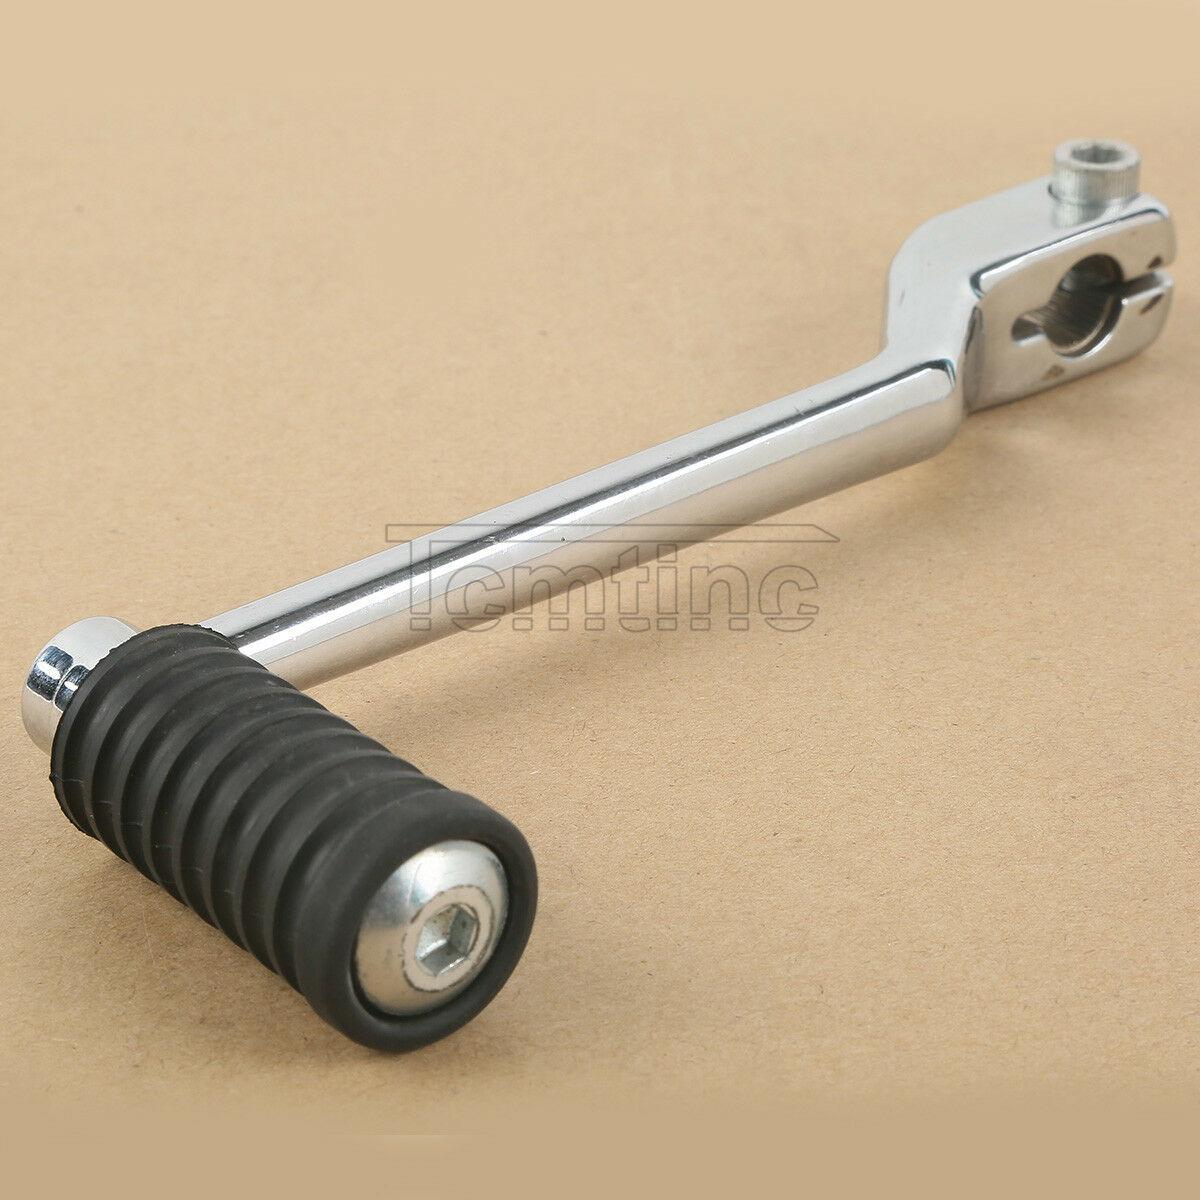 Gear Shift Shifter Lever Pedal For Harley Touring Electra Glide Softail FL Trike - Moto Life Products